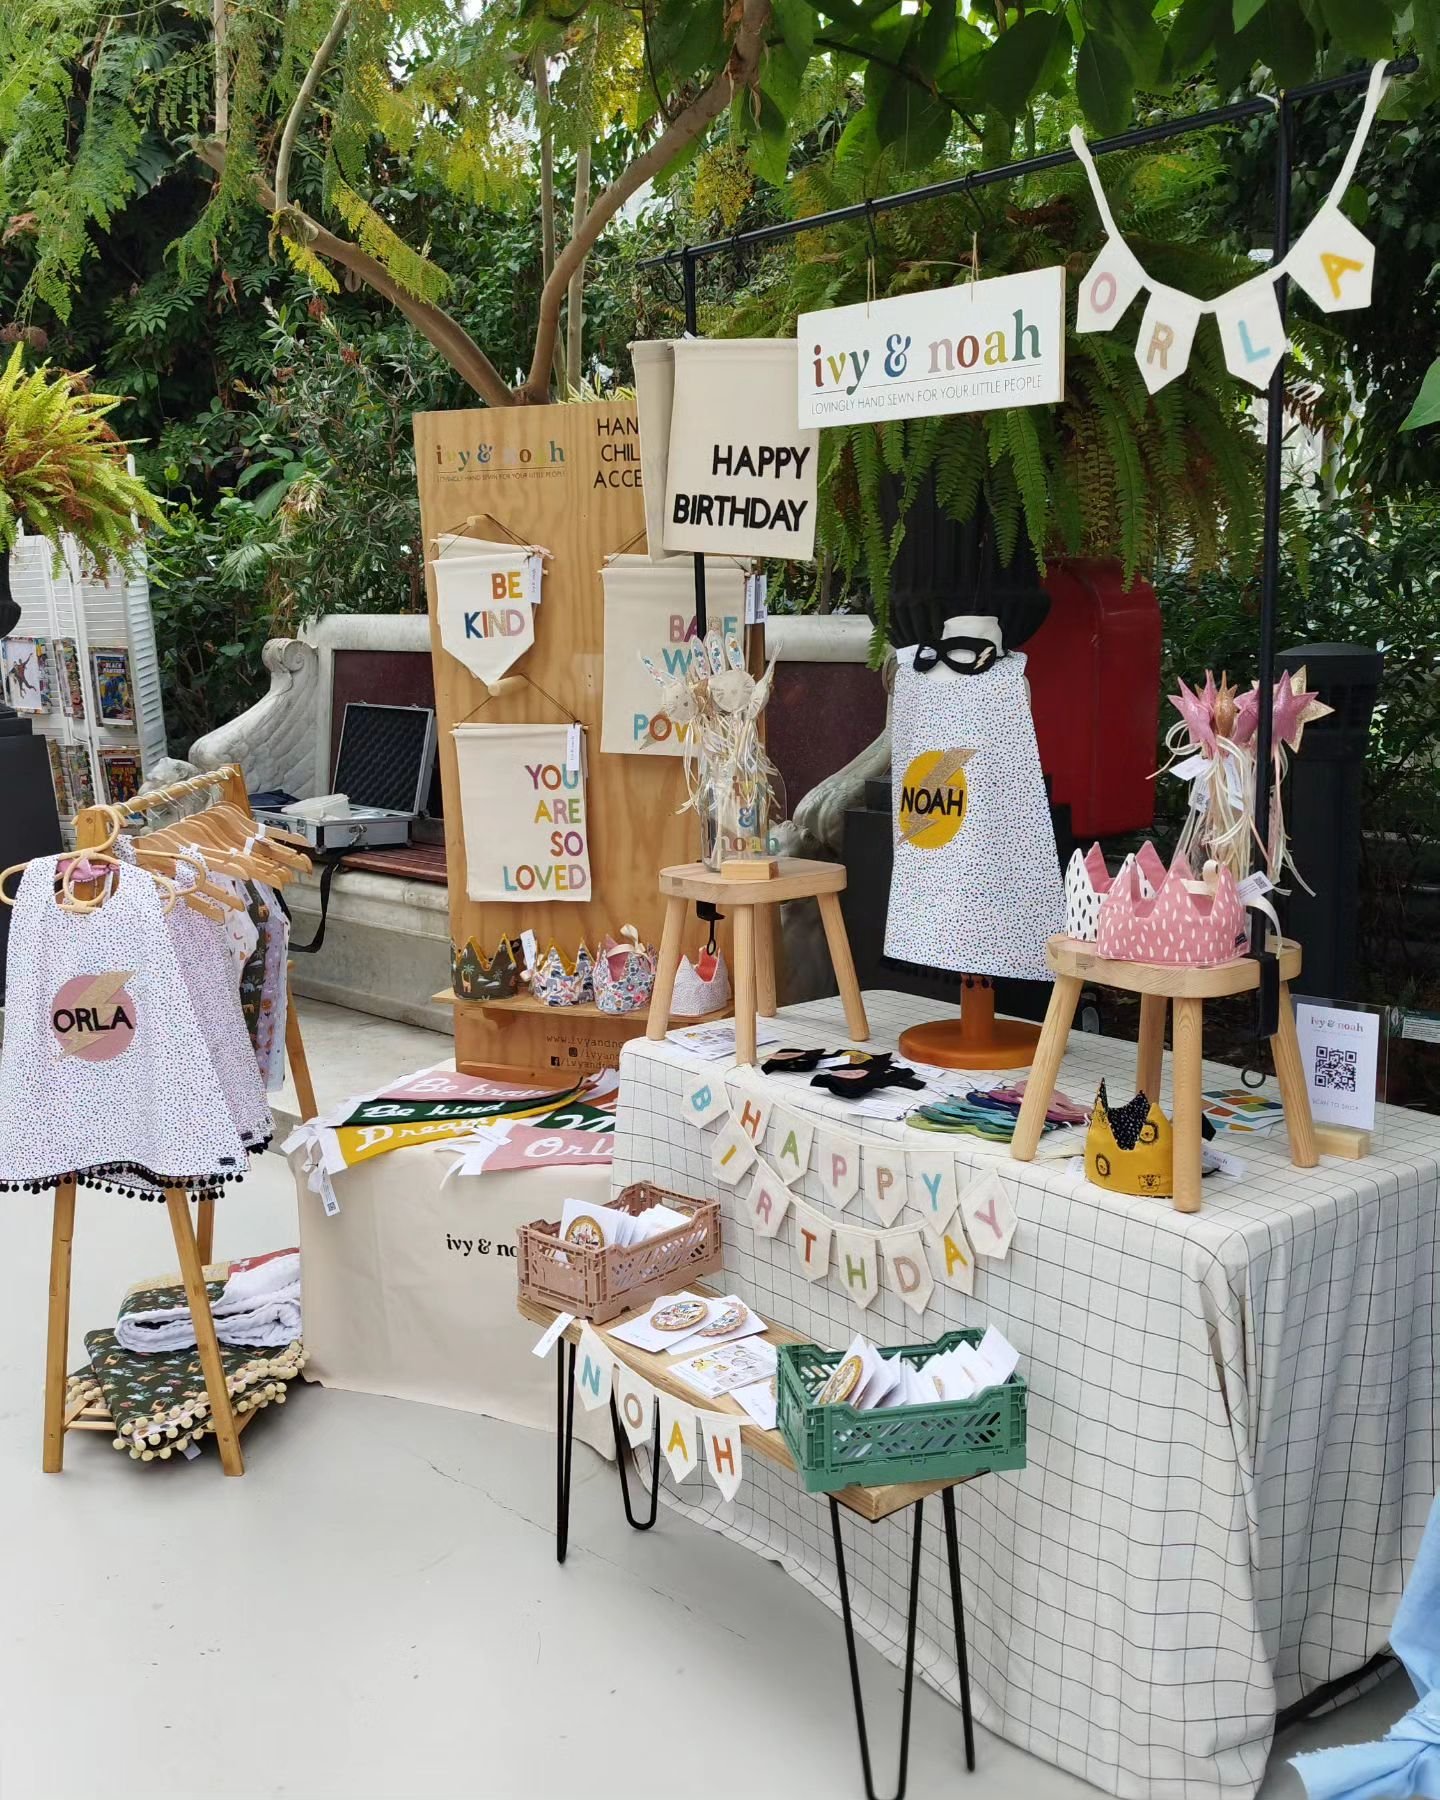 I'll so happy to finally be at the Pop Up Palm House market - I put the reminder on this year so I didn't miss out. I'll be here until 2.30-7.30pm today and back again tomorrow. It's been a busy old month - ready for a rest after this event. 

Hope t